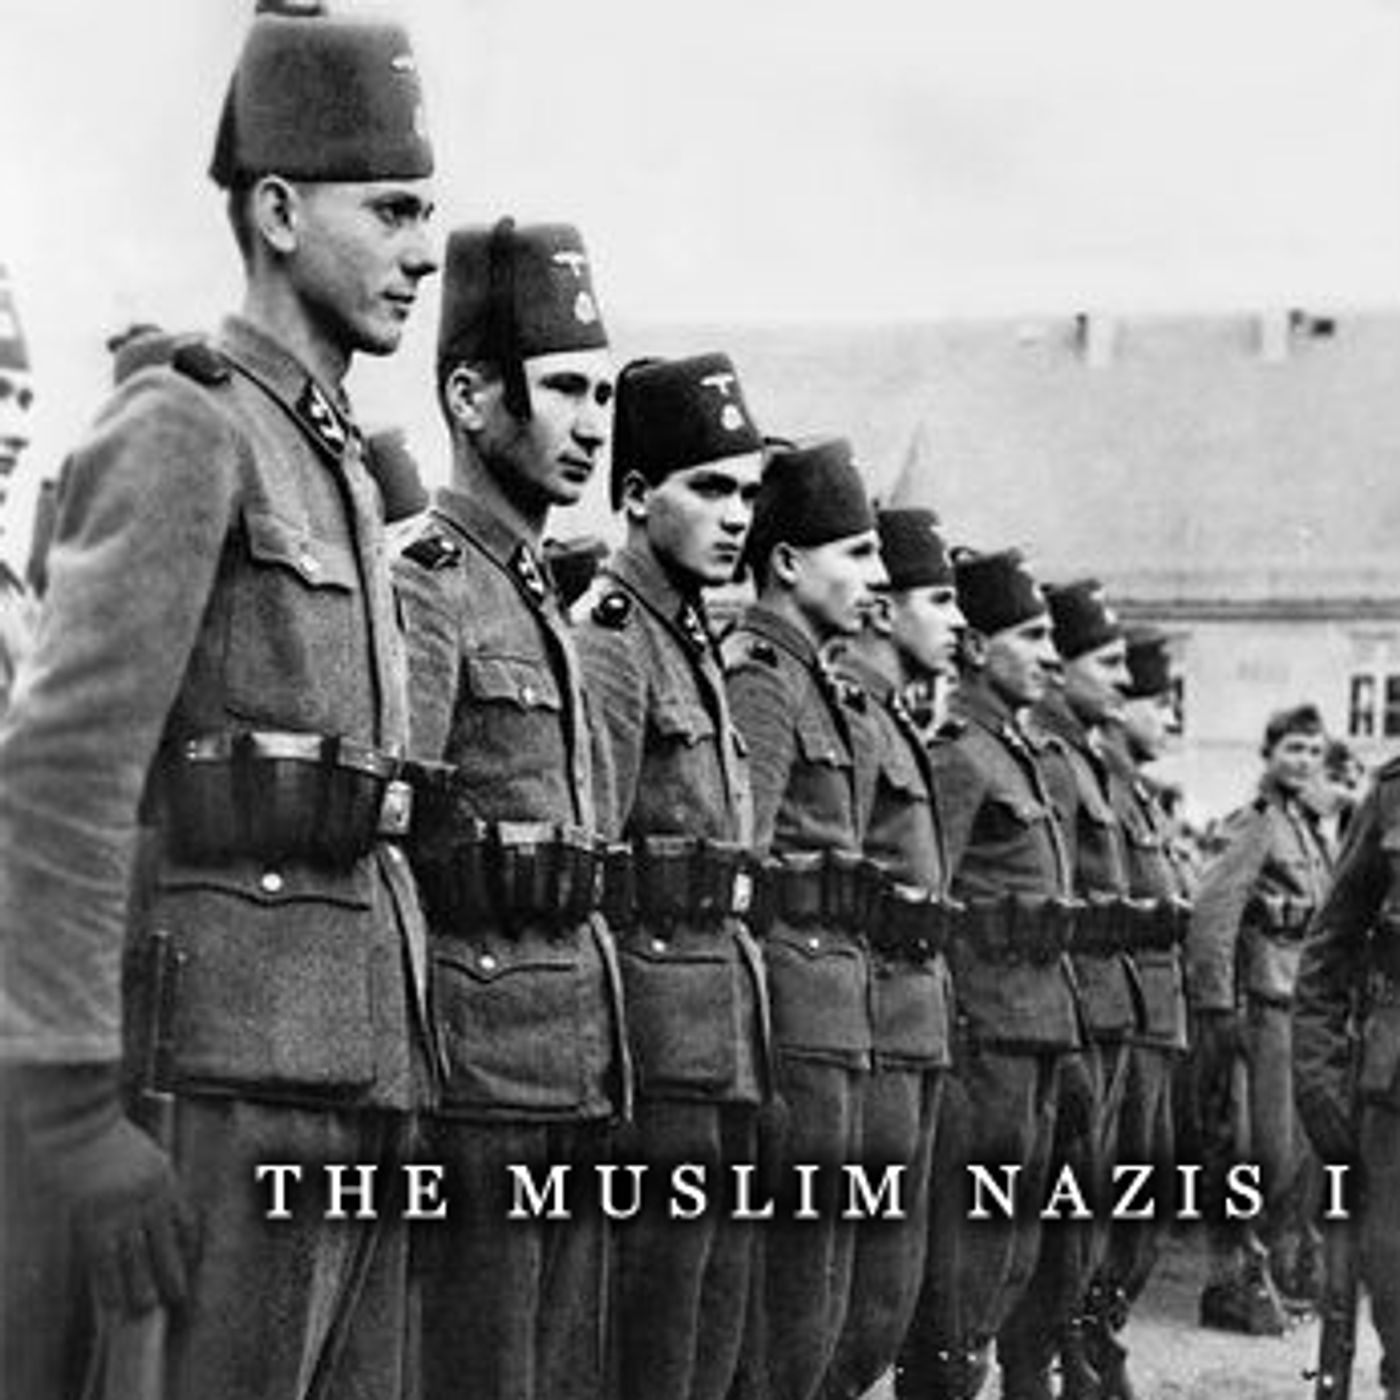 The Muslim Nazis I: Early Adventures with Imperial German Islamophilia